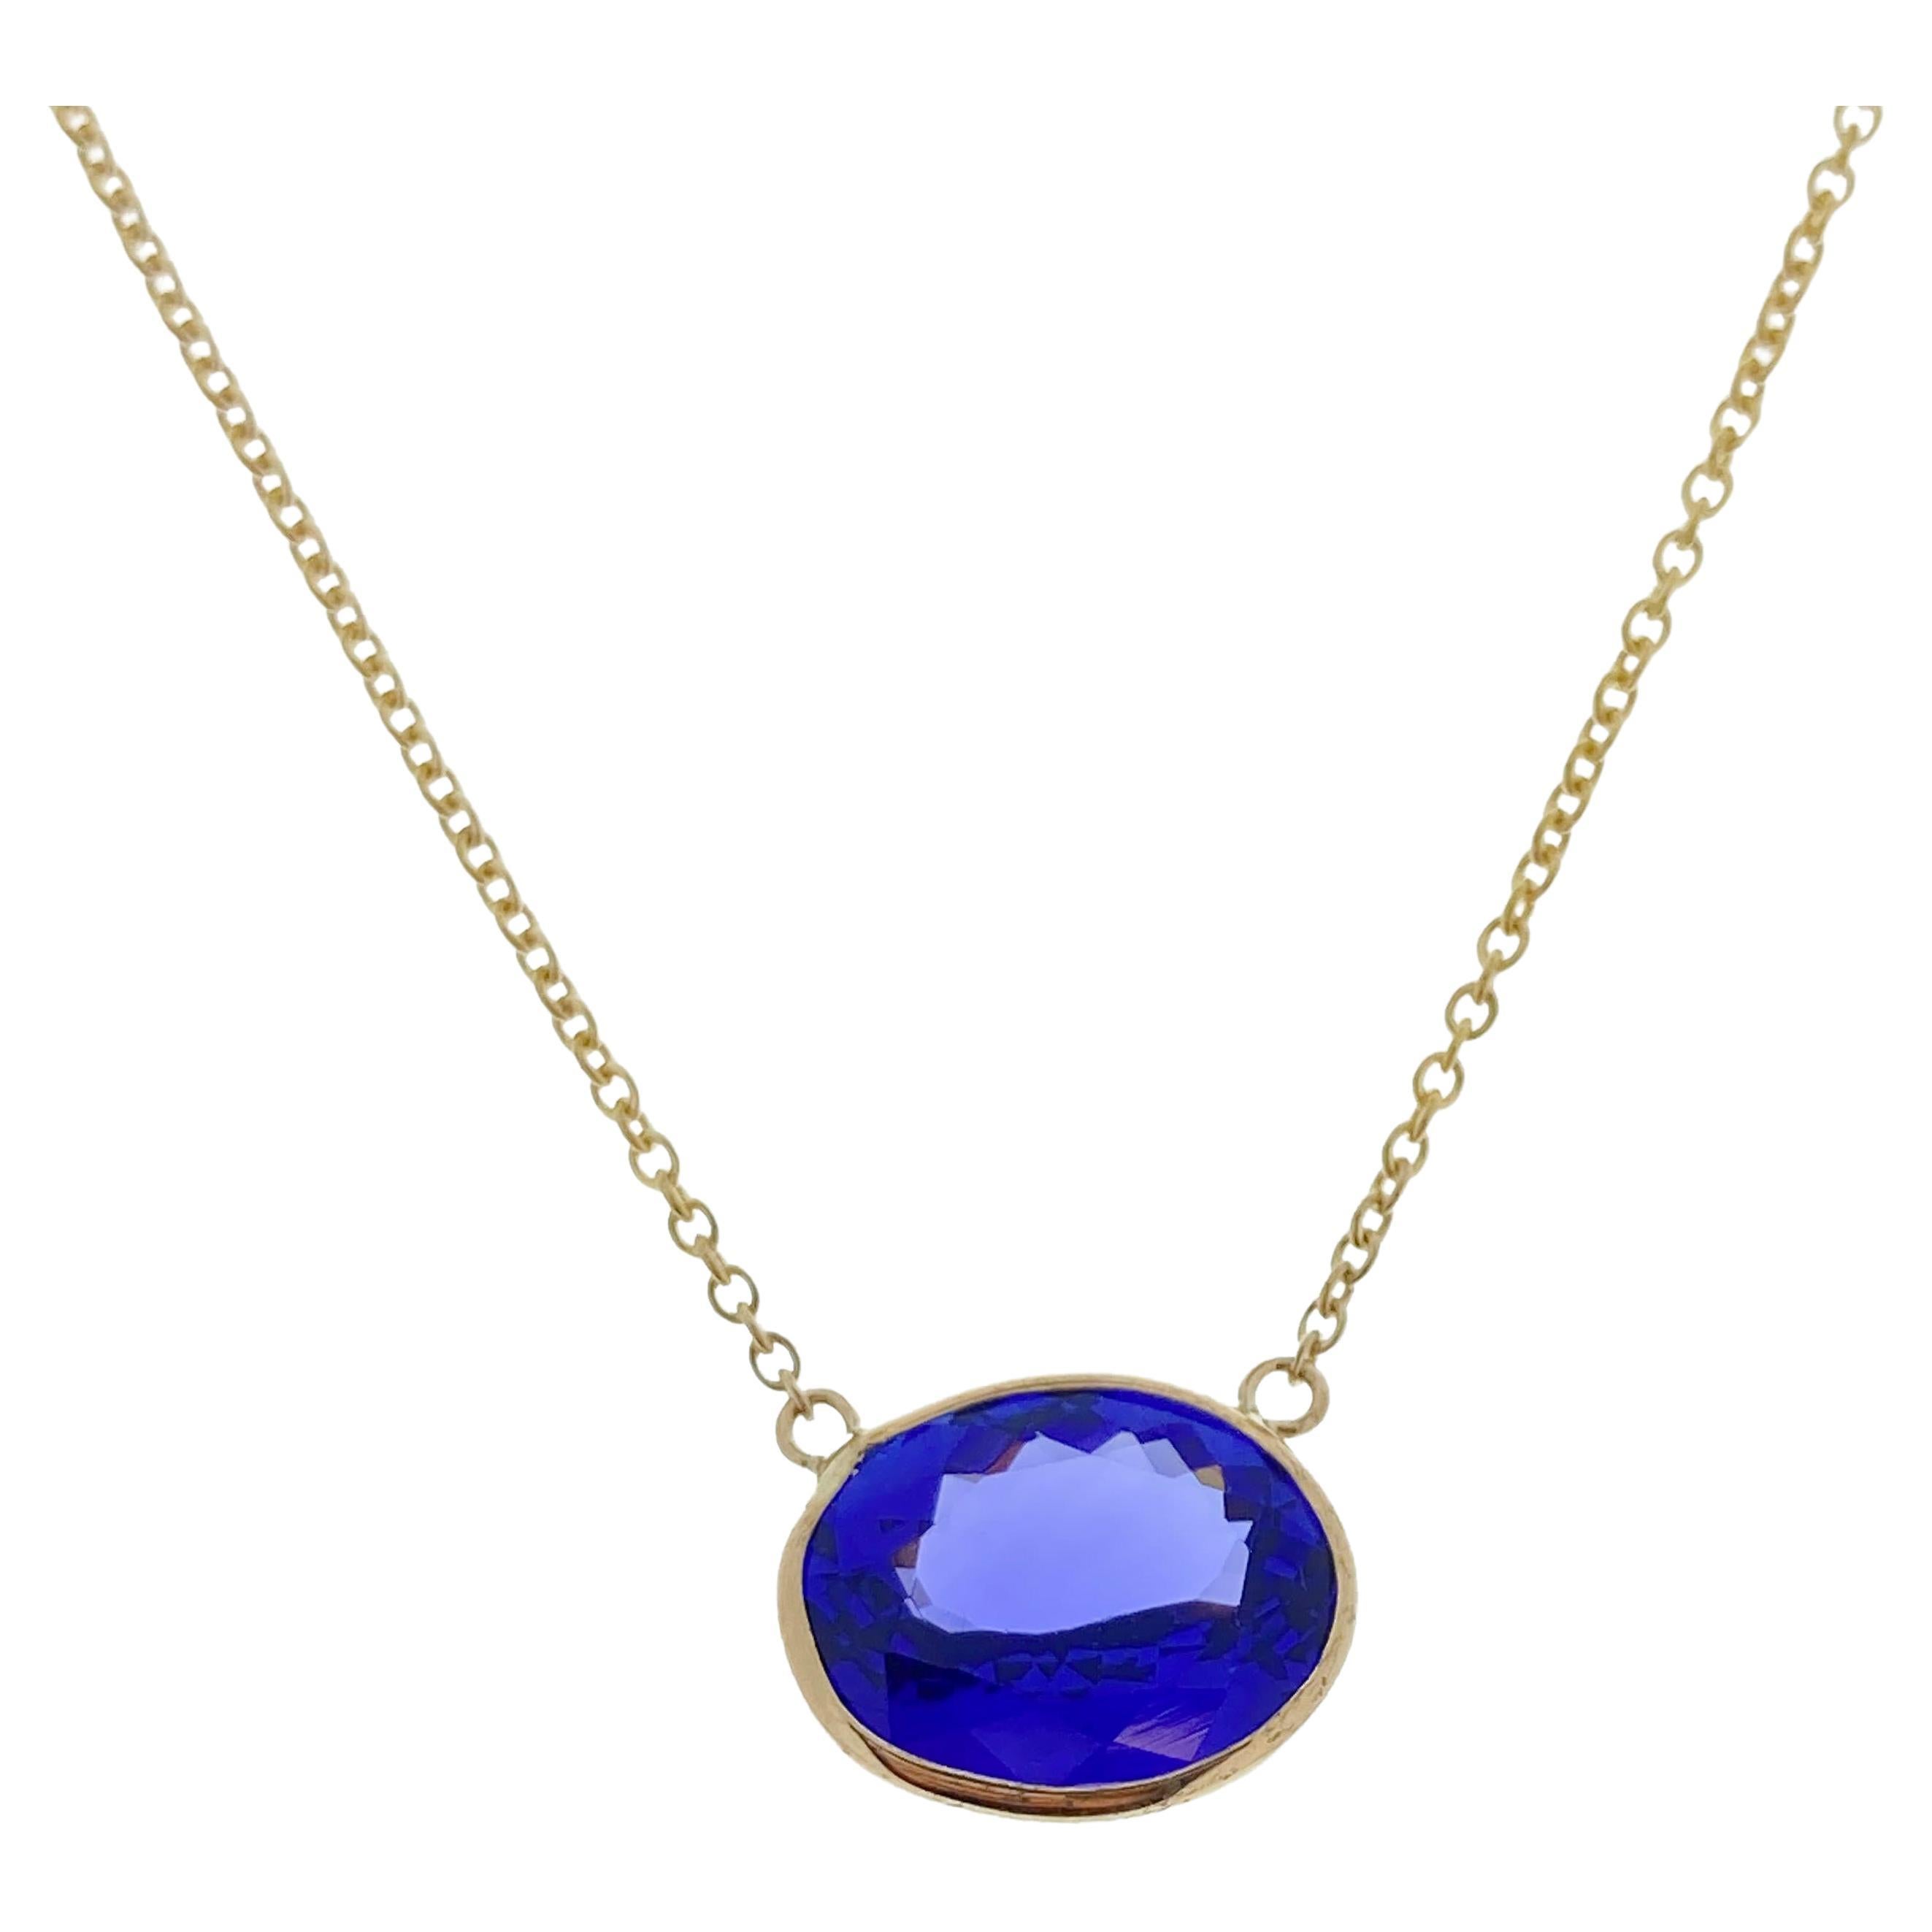 4.13 Carat Oval Blue Tanzanite Fashion Necklaces In 14k Yellow Gold  For Sale